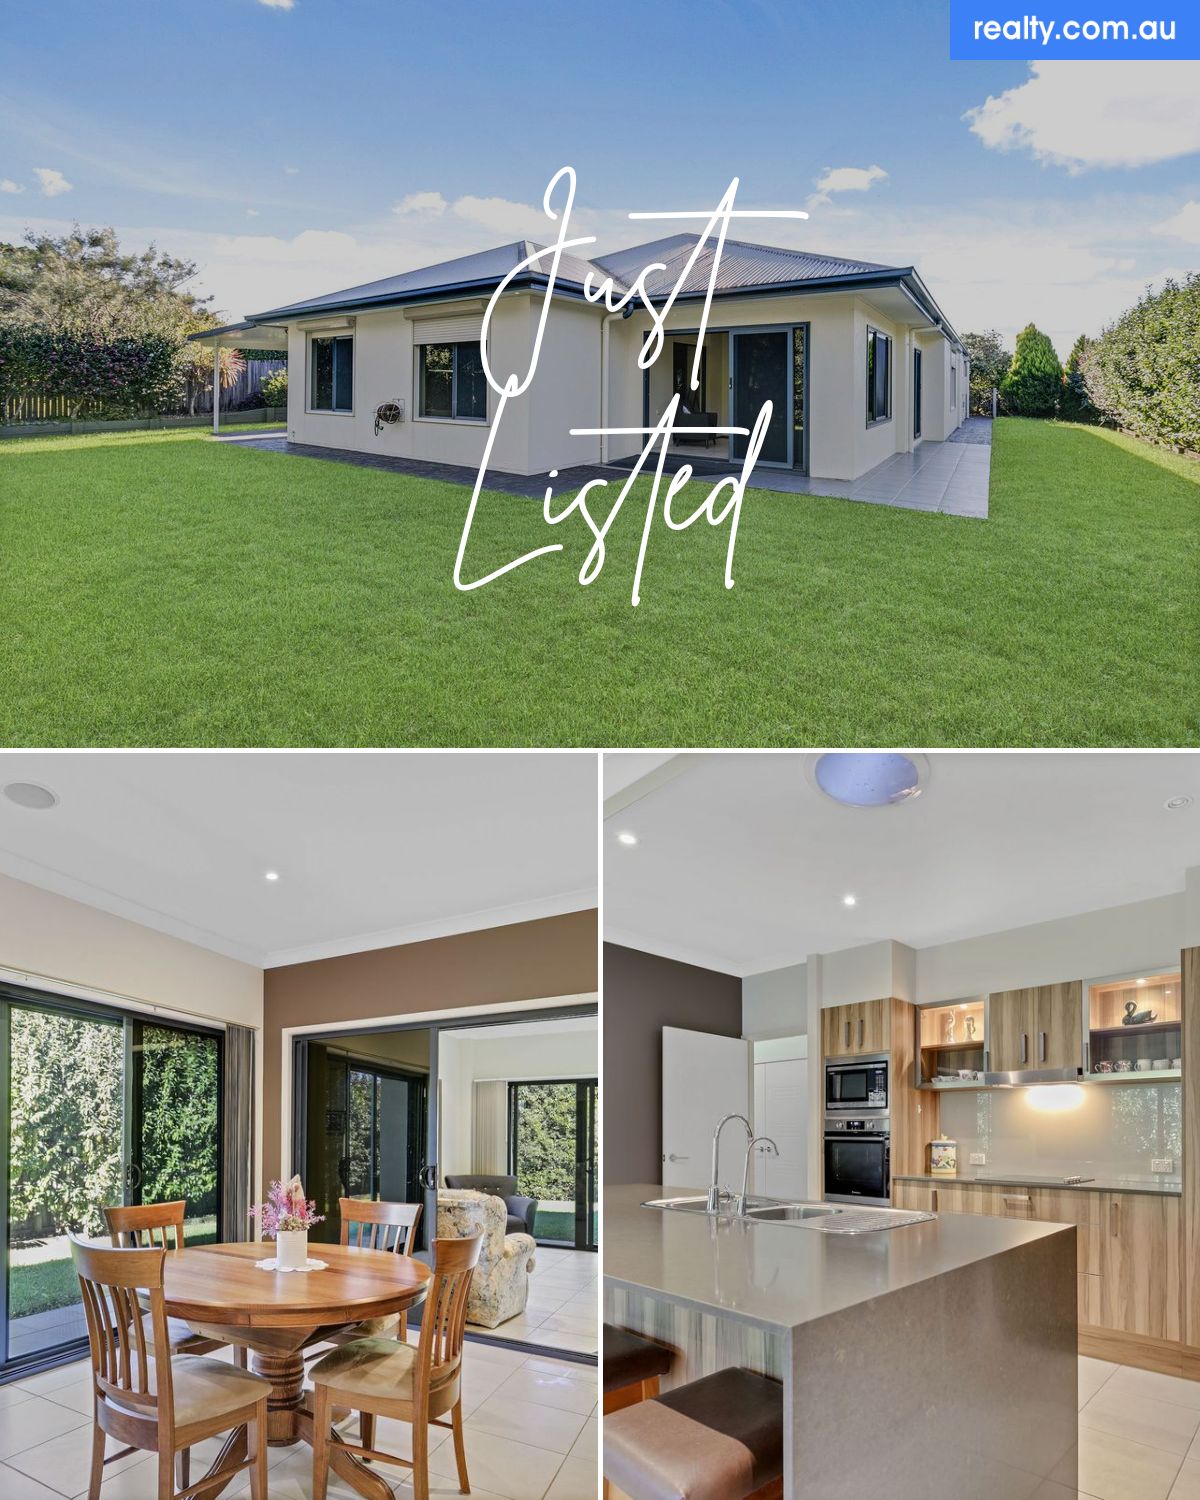 16 Curlew Court, Maleny, QLD 4552 | Realty.com.au